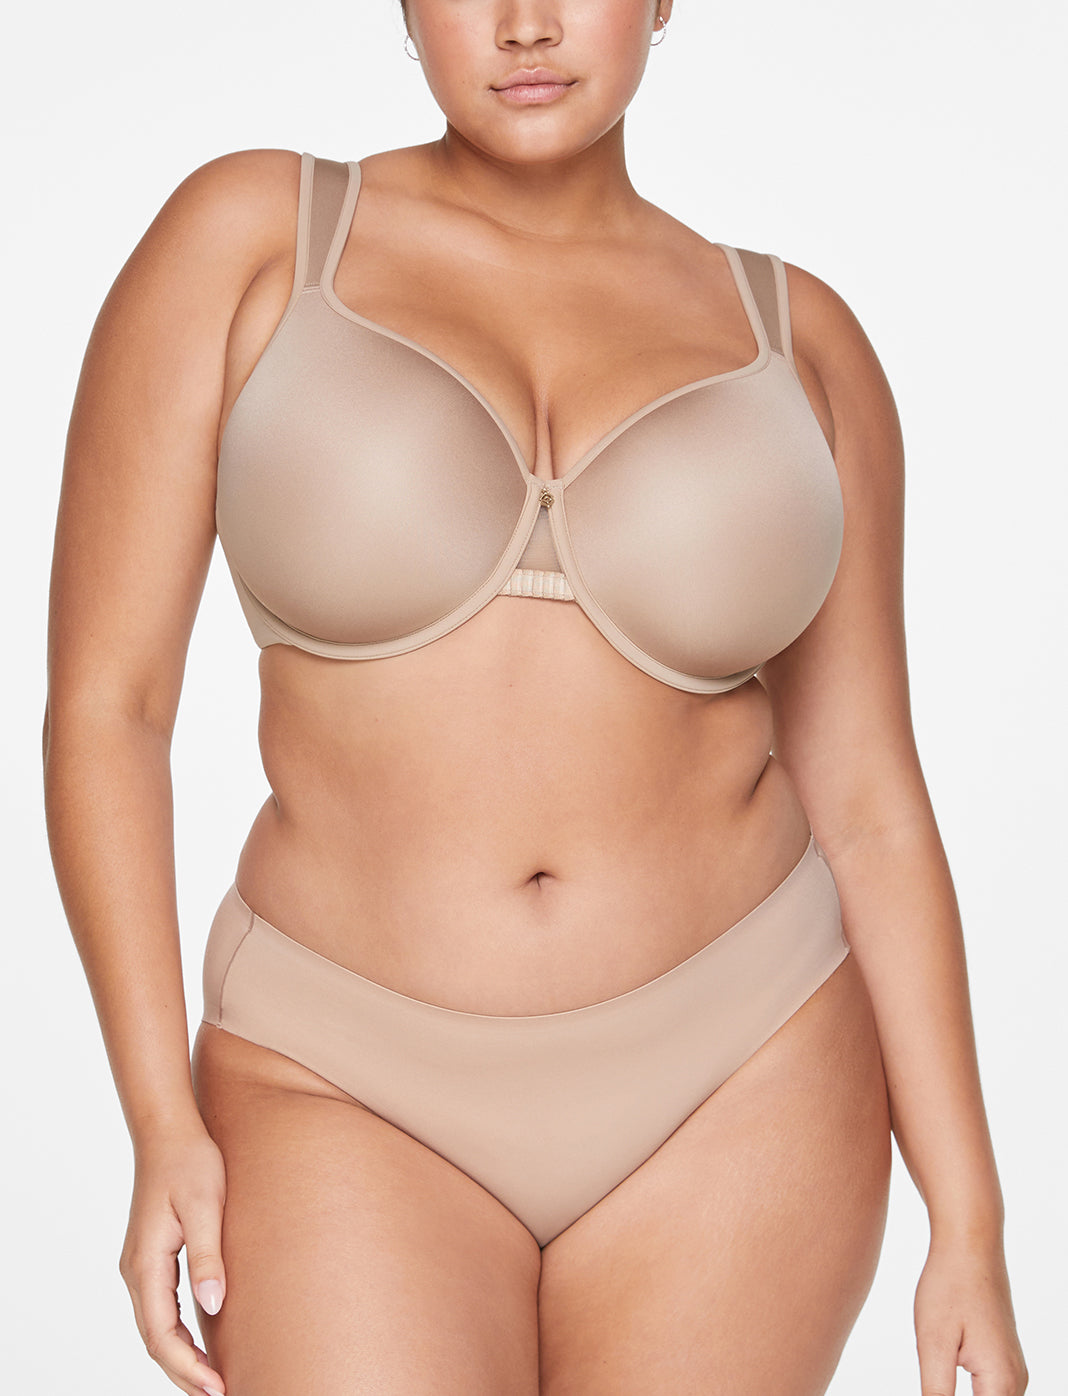 Updated bra review review 9/21/20 